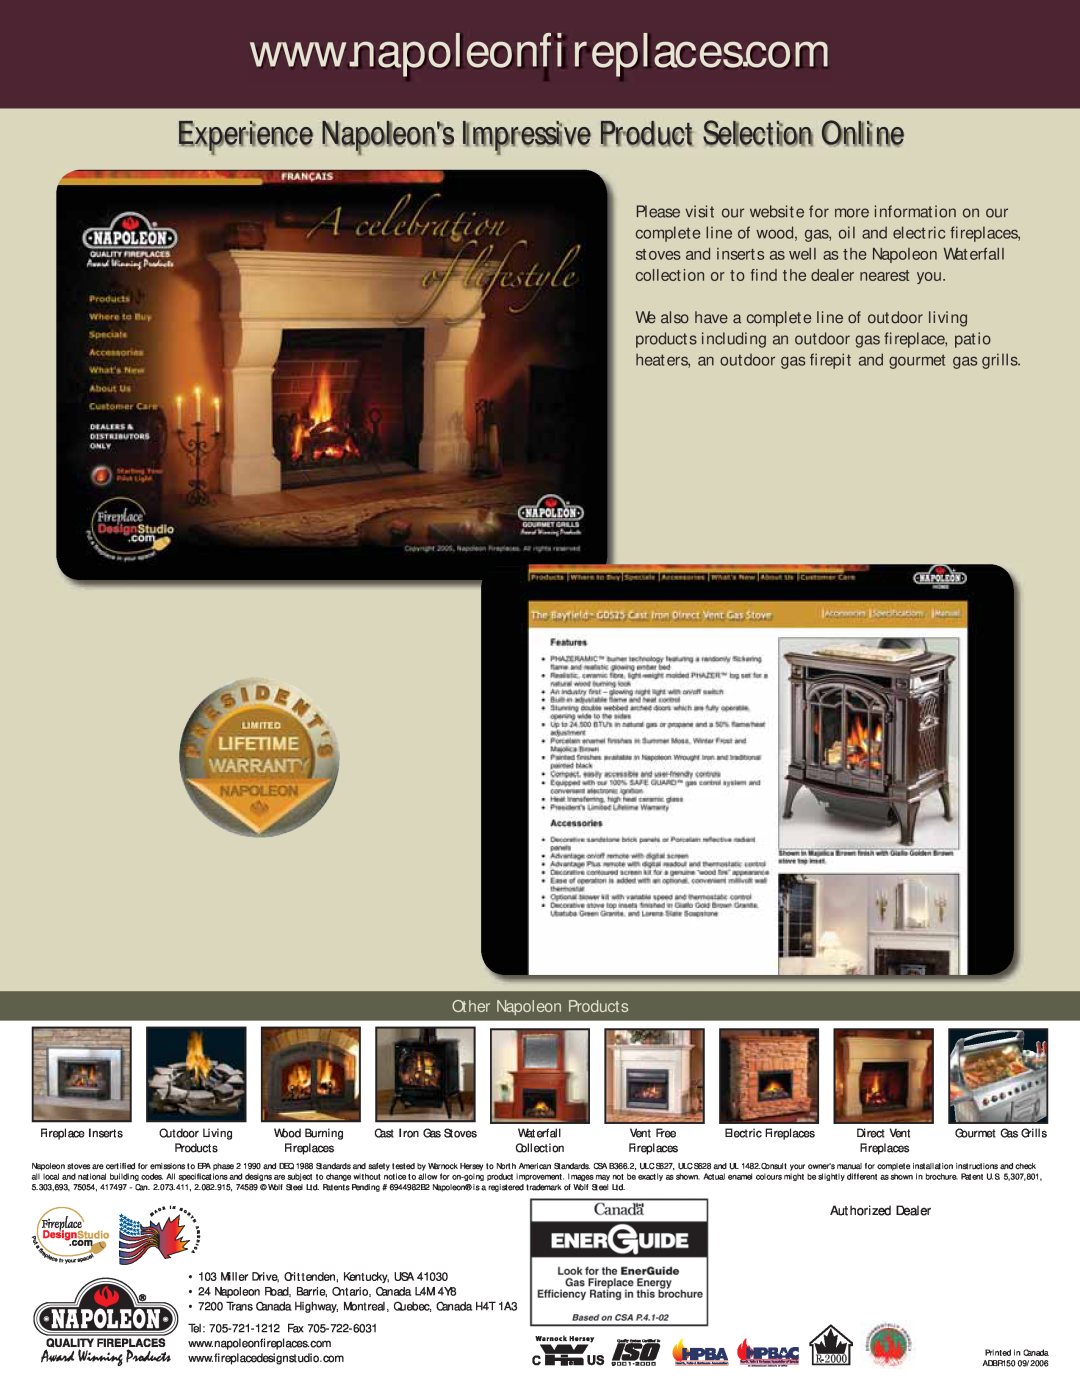 Napoleon Fireplaces Gas Burning Stoves manual Other Napoleon Products 